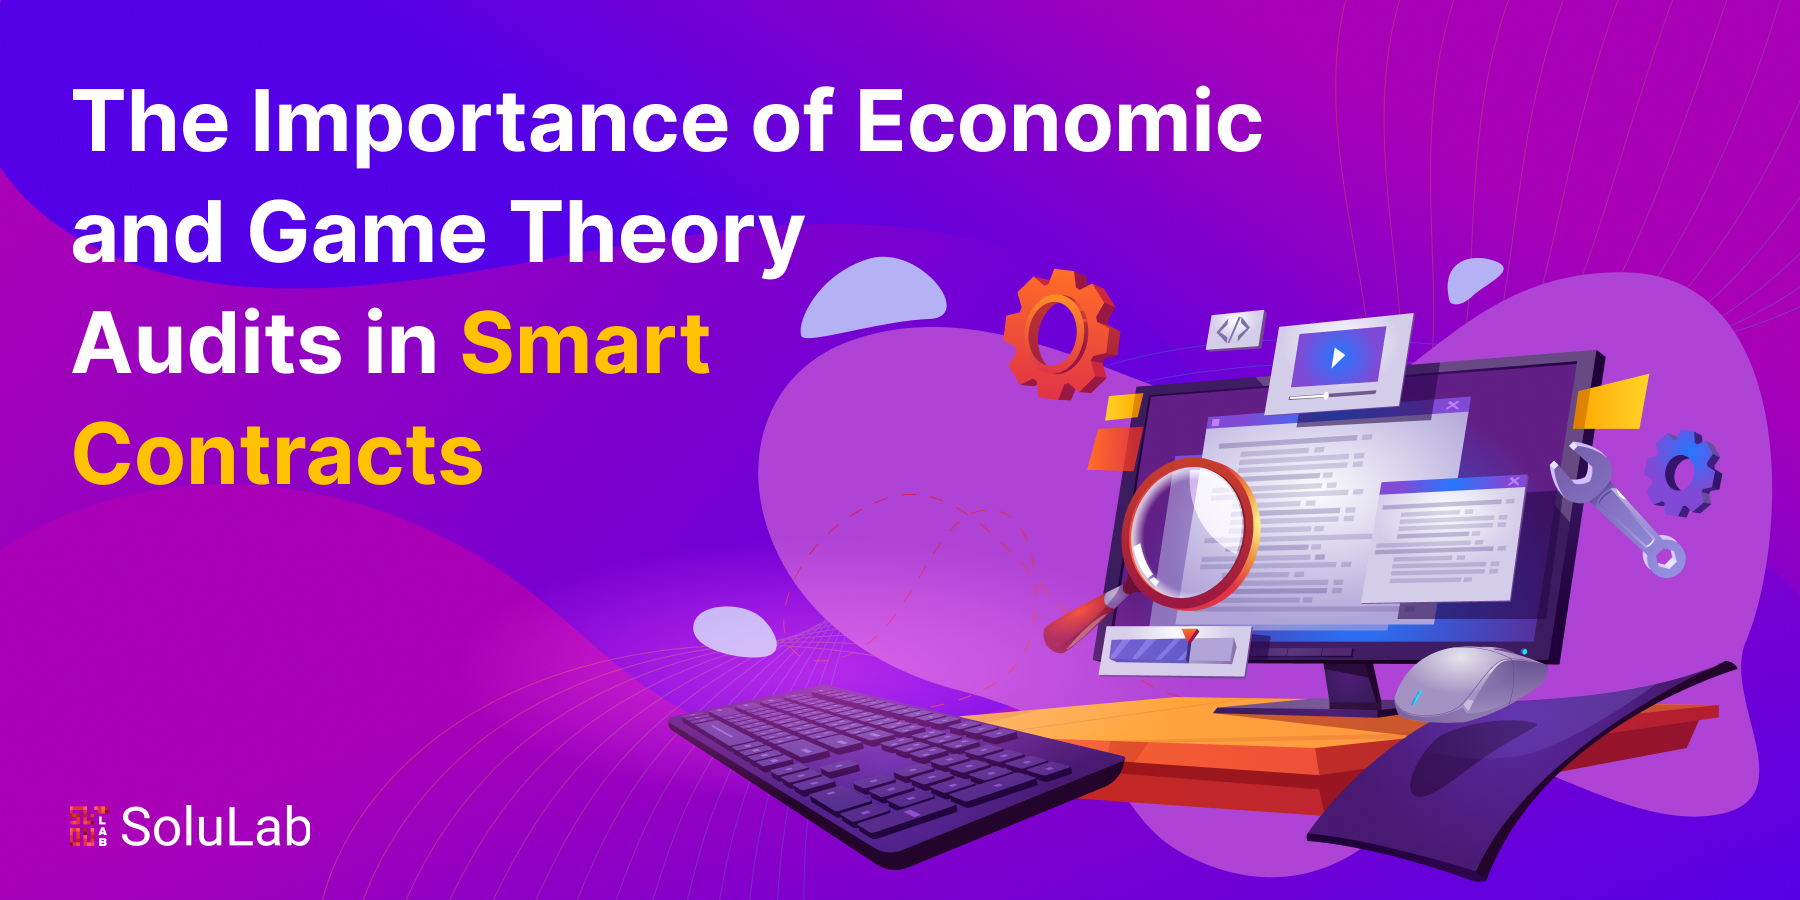 The Importance of Economic and Game Theory Audits in Smart Contracts